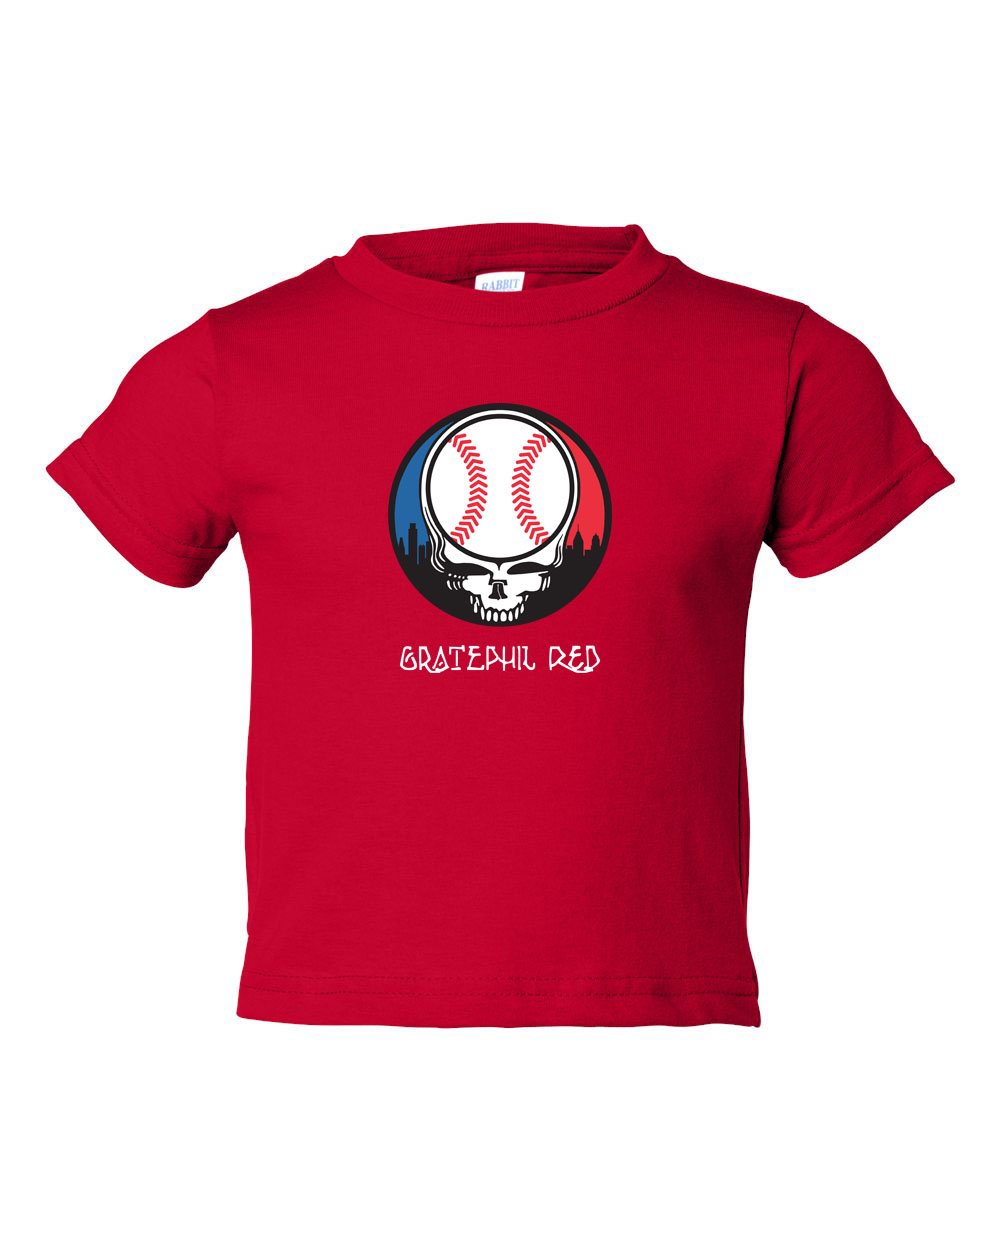 Gratephil Red TODDLER T-Shirt